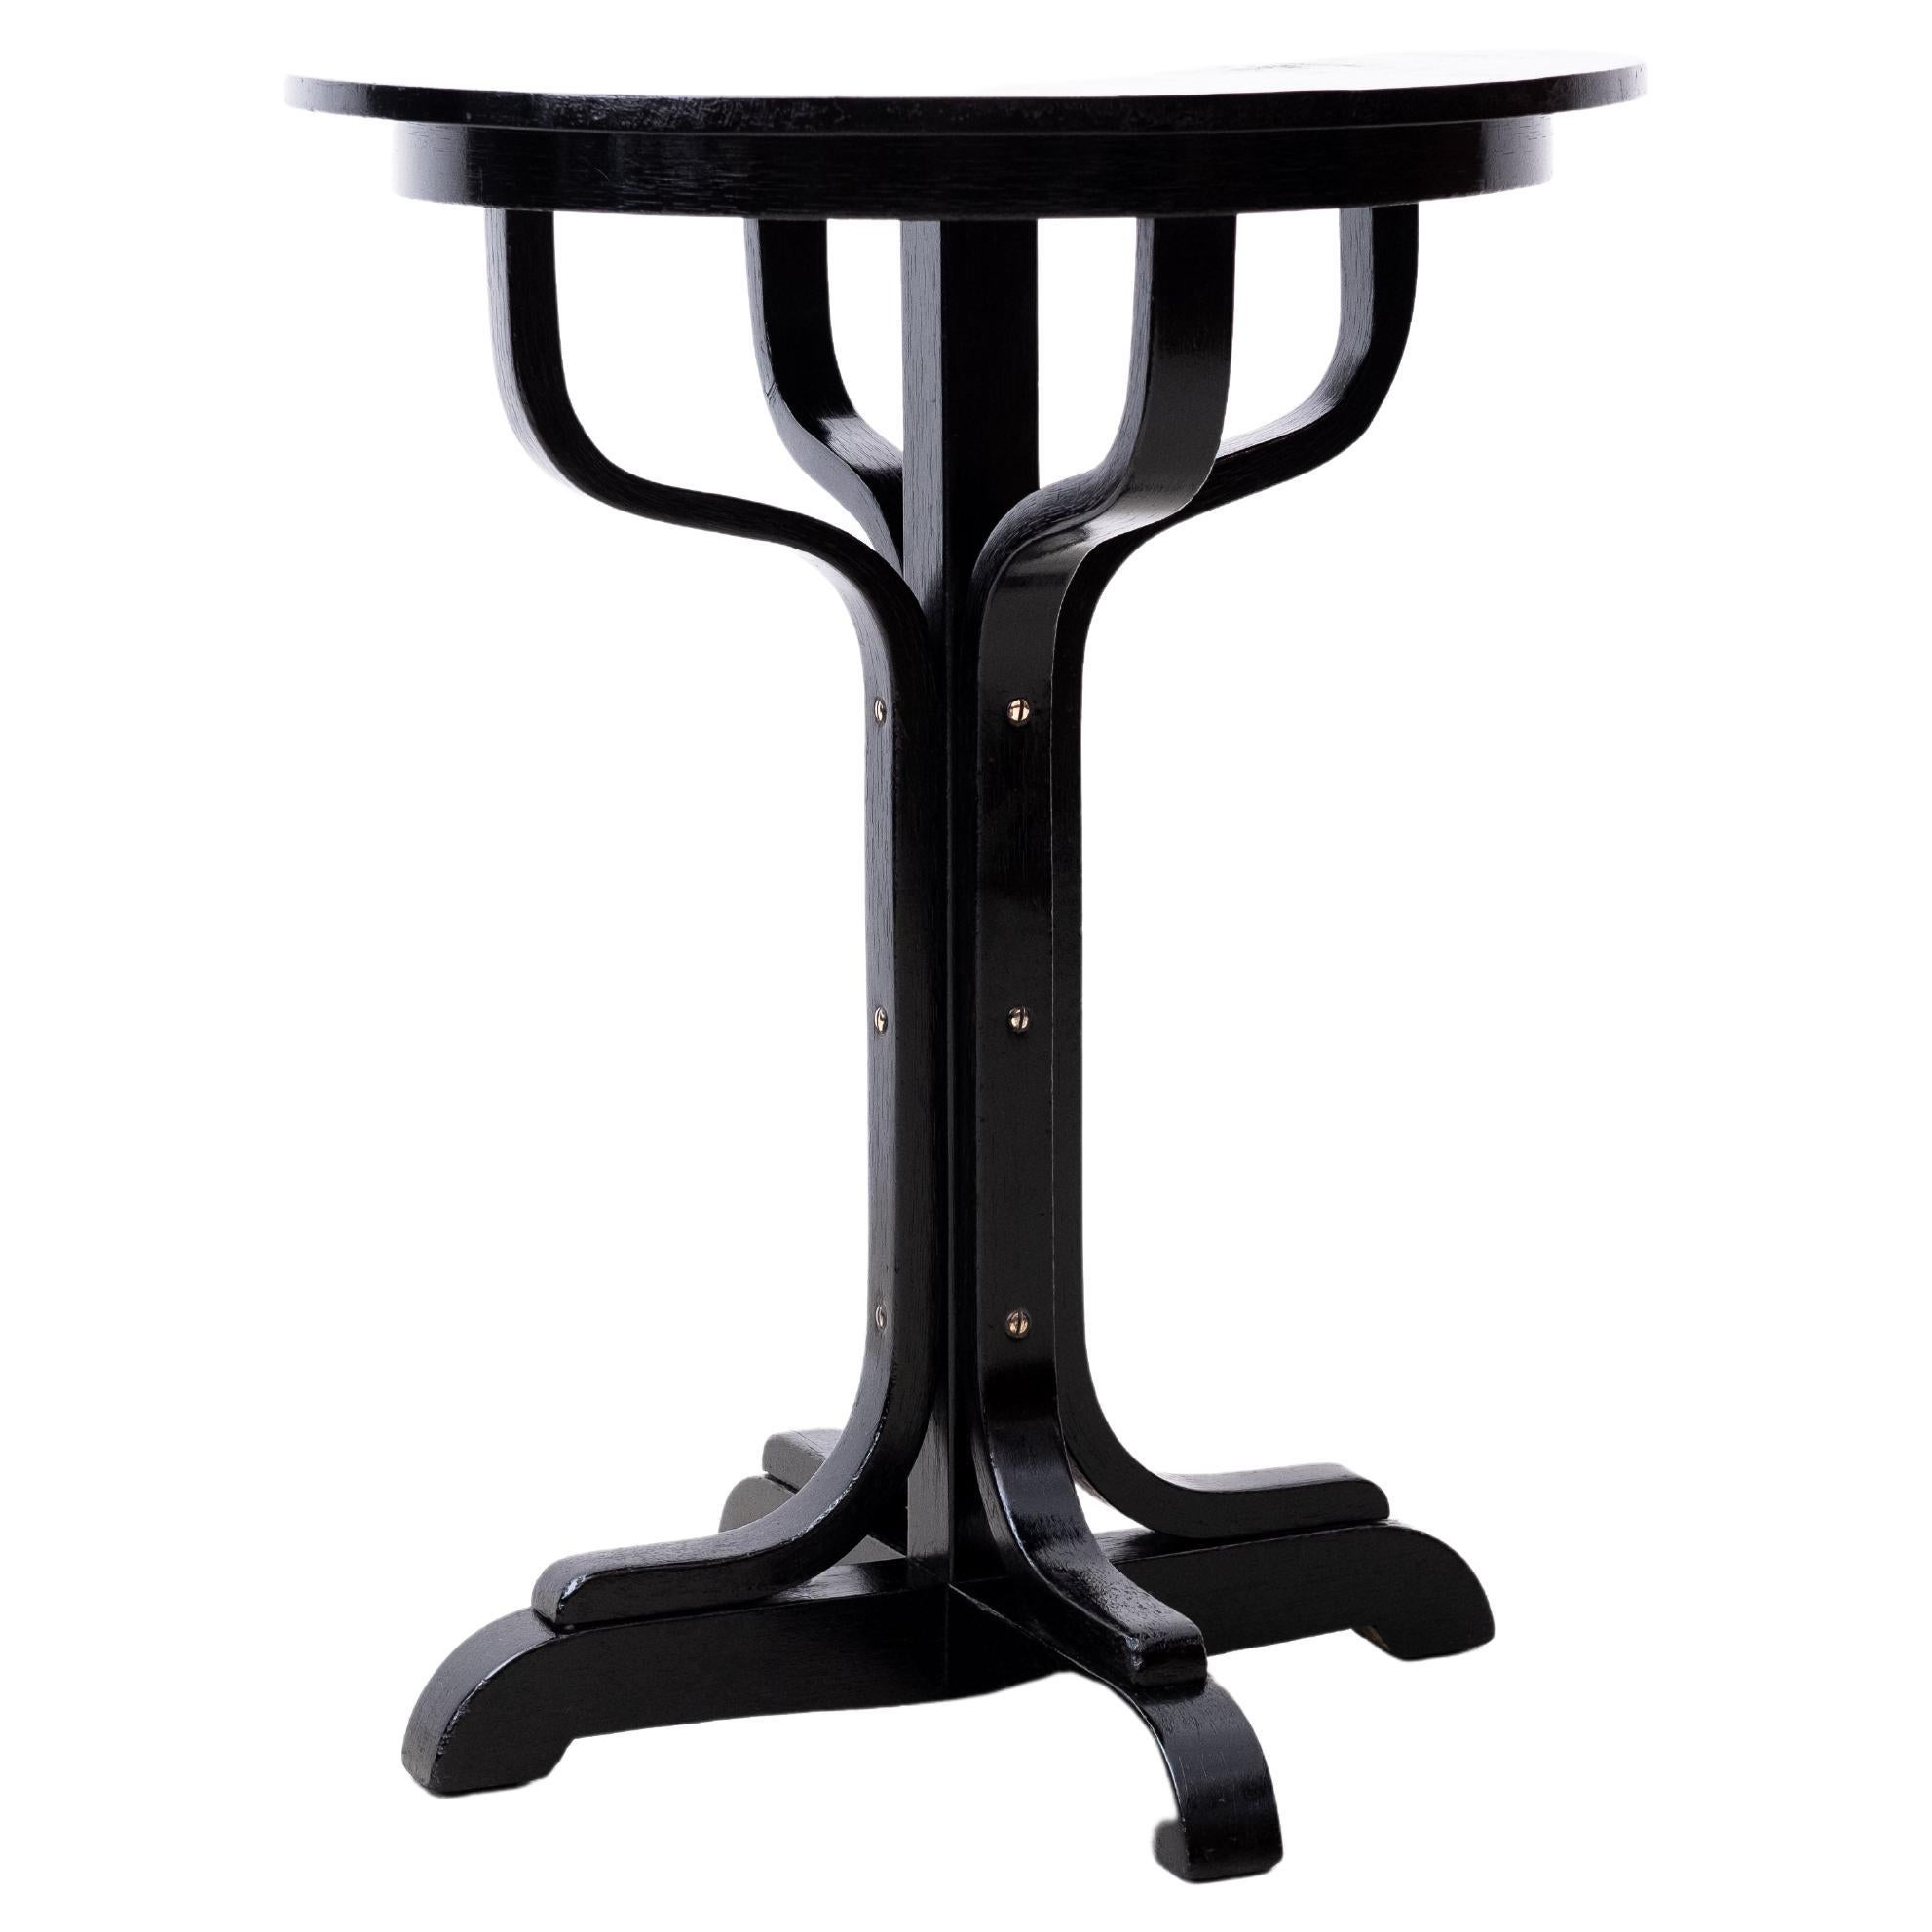 Art Nouveau Sidetable, Otto Wagner for Thonet Brothers, Type 8024 (Vienna, 1905) For Sale